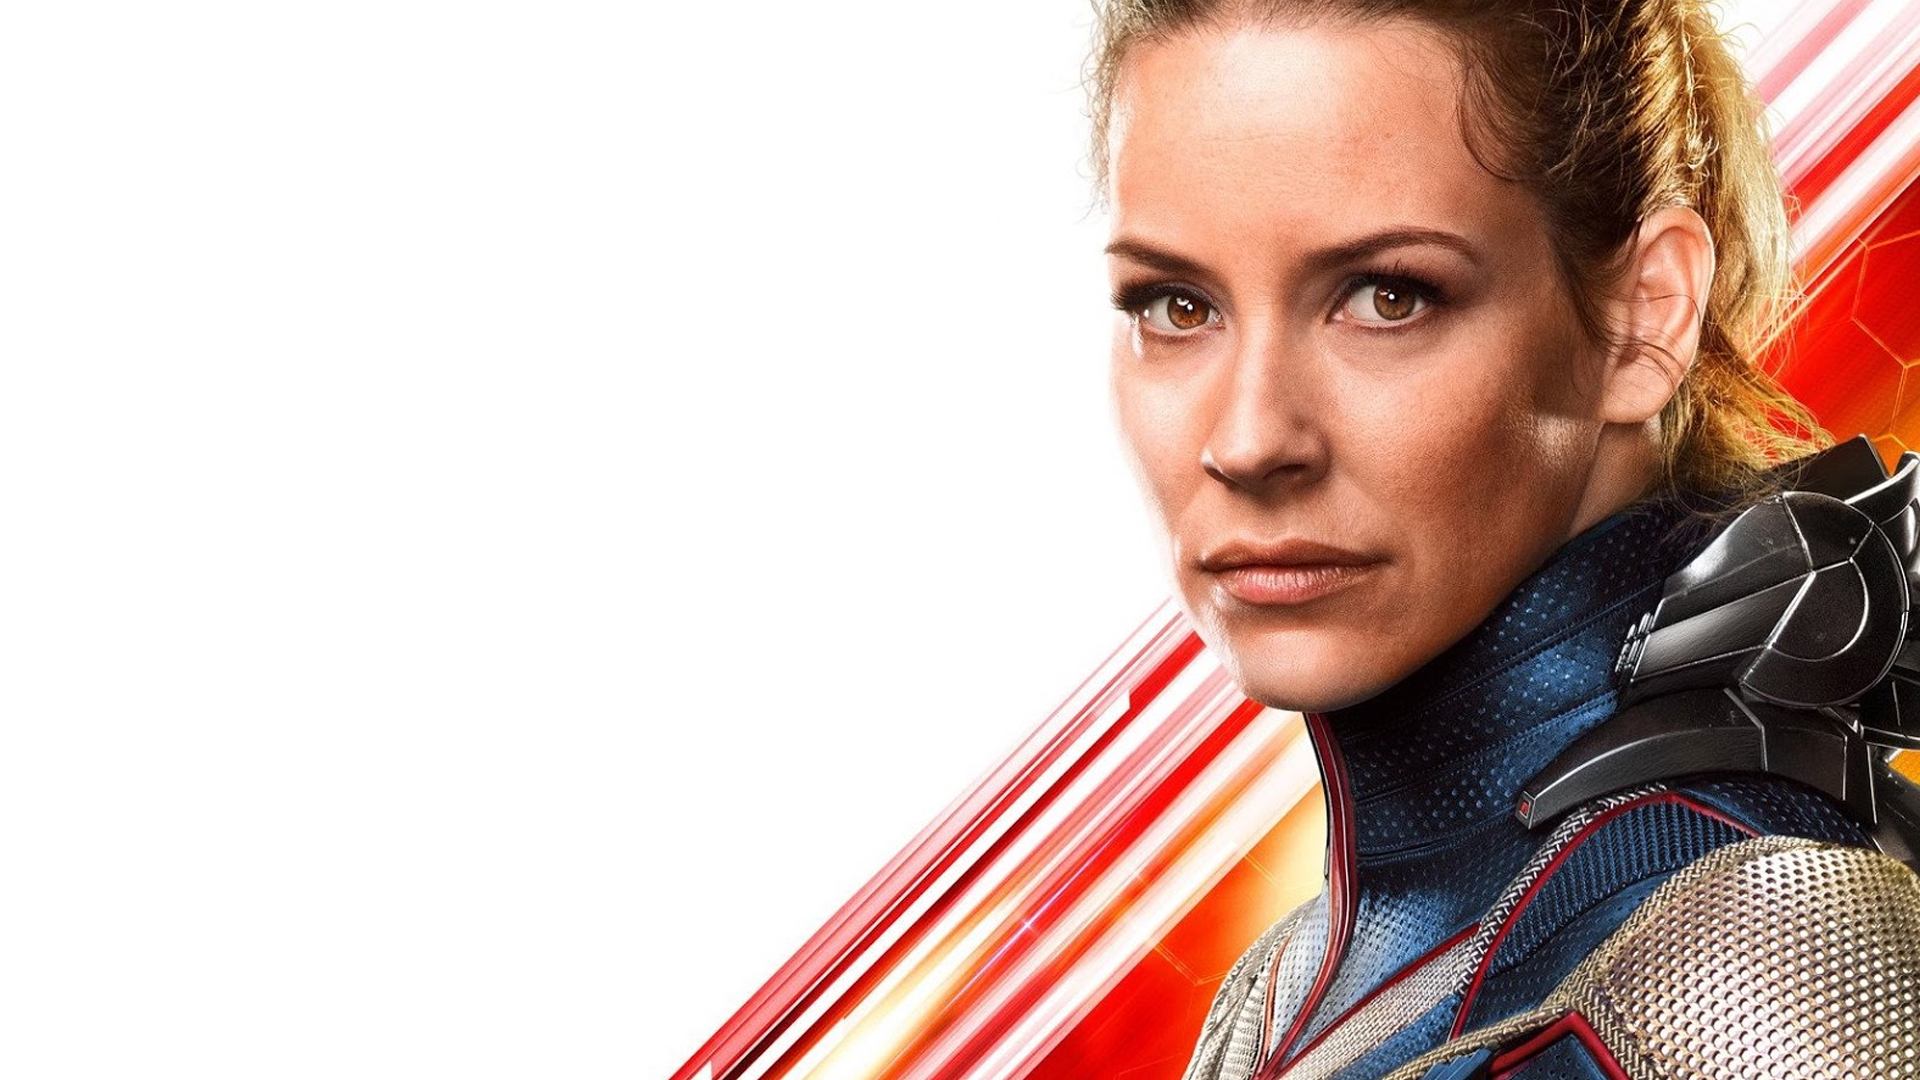 ALL 2O MCU FILMS RANKED FROM BEST TO WORST IRON MAN TO ANTMAN AND THE WASP featured image